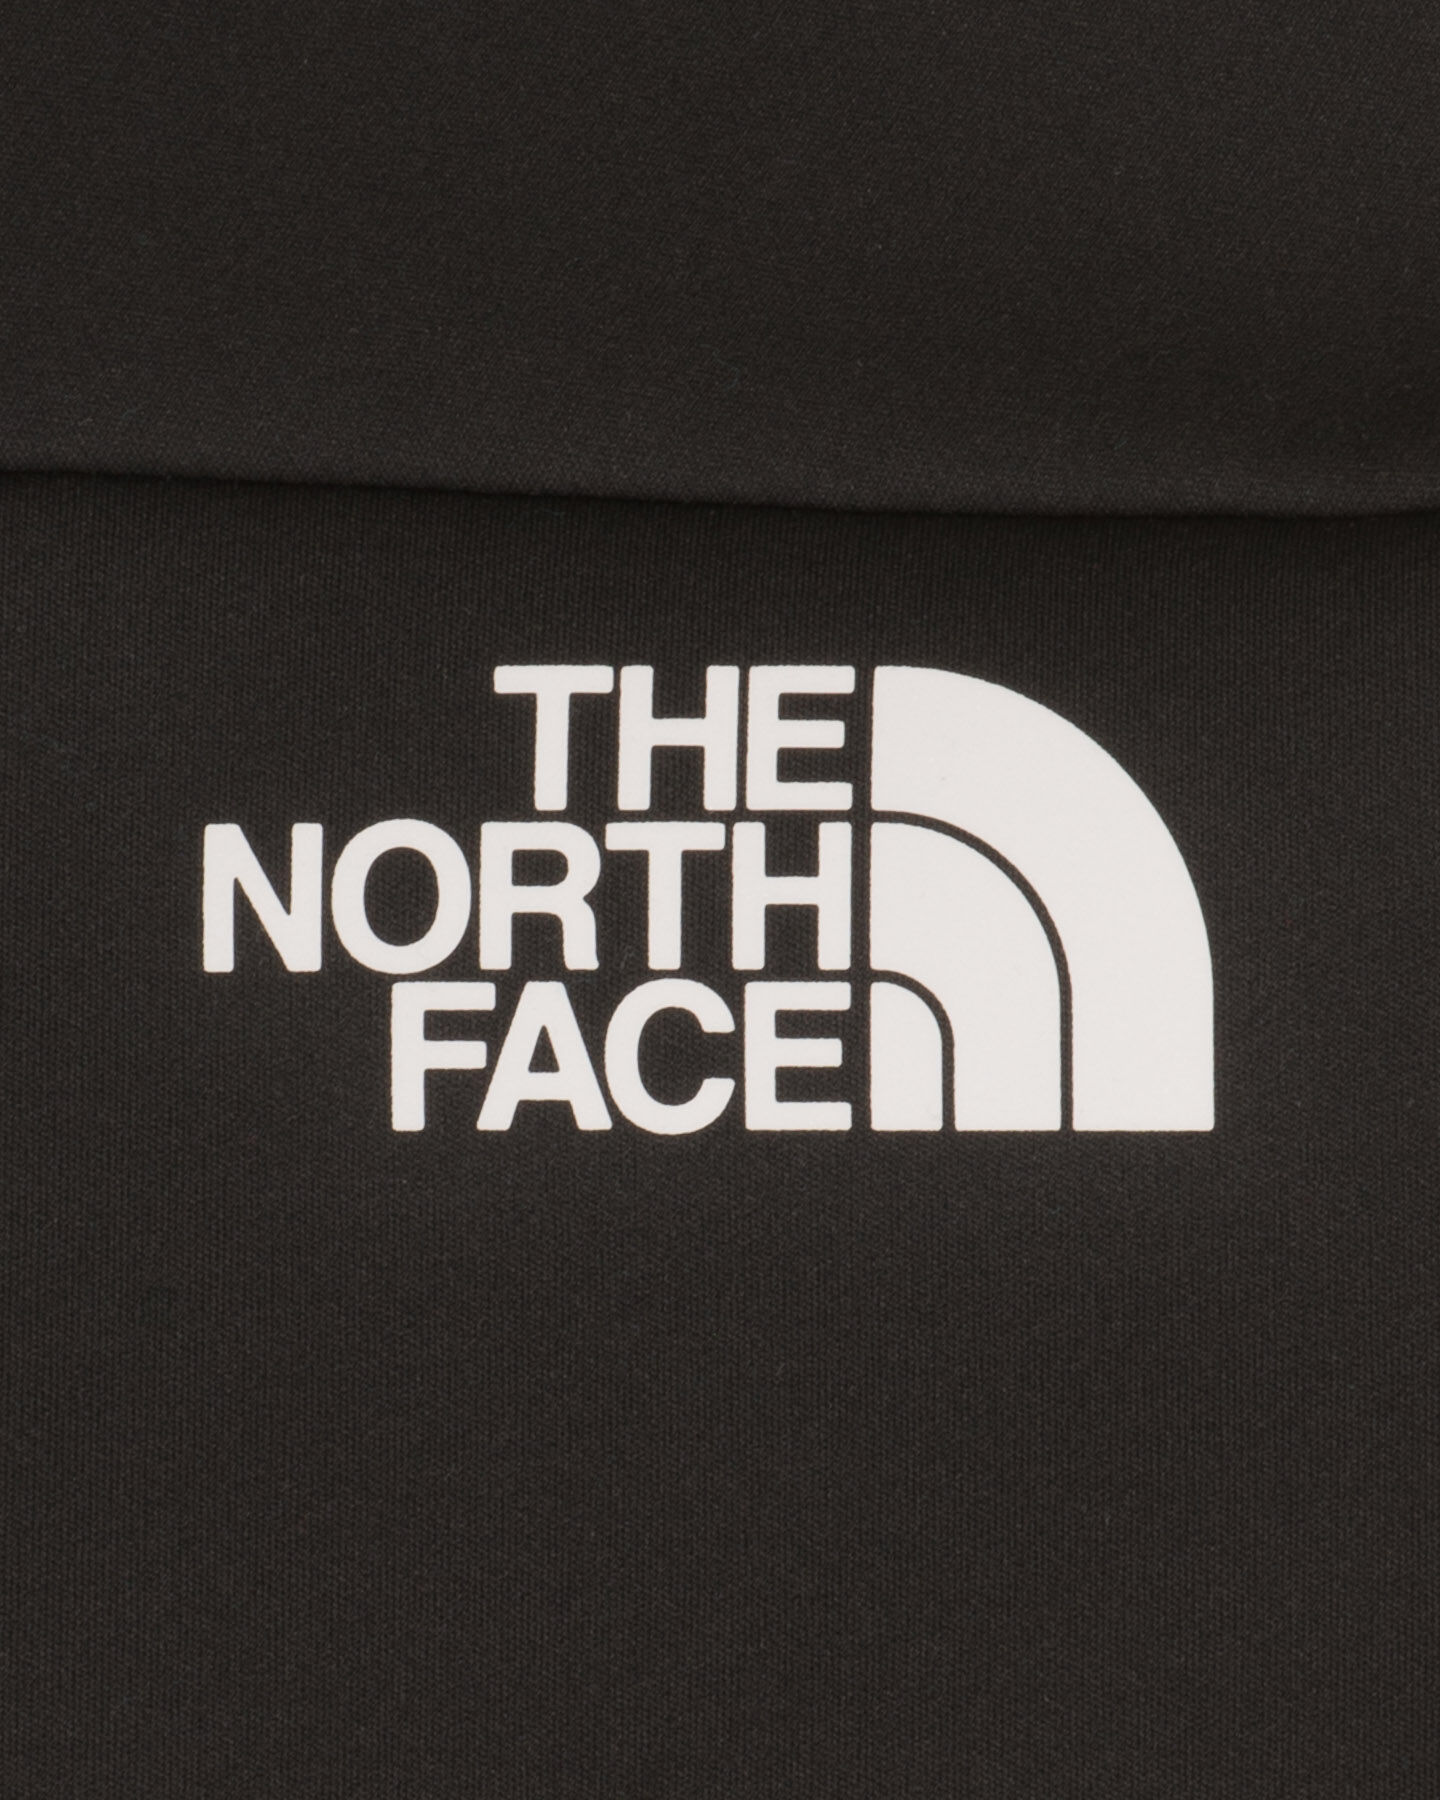  Pile THE NORTH FACE SPEEDTOUR FZ STRETCH M S5354823|5J6|S scatto 2